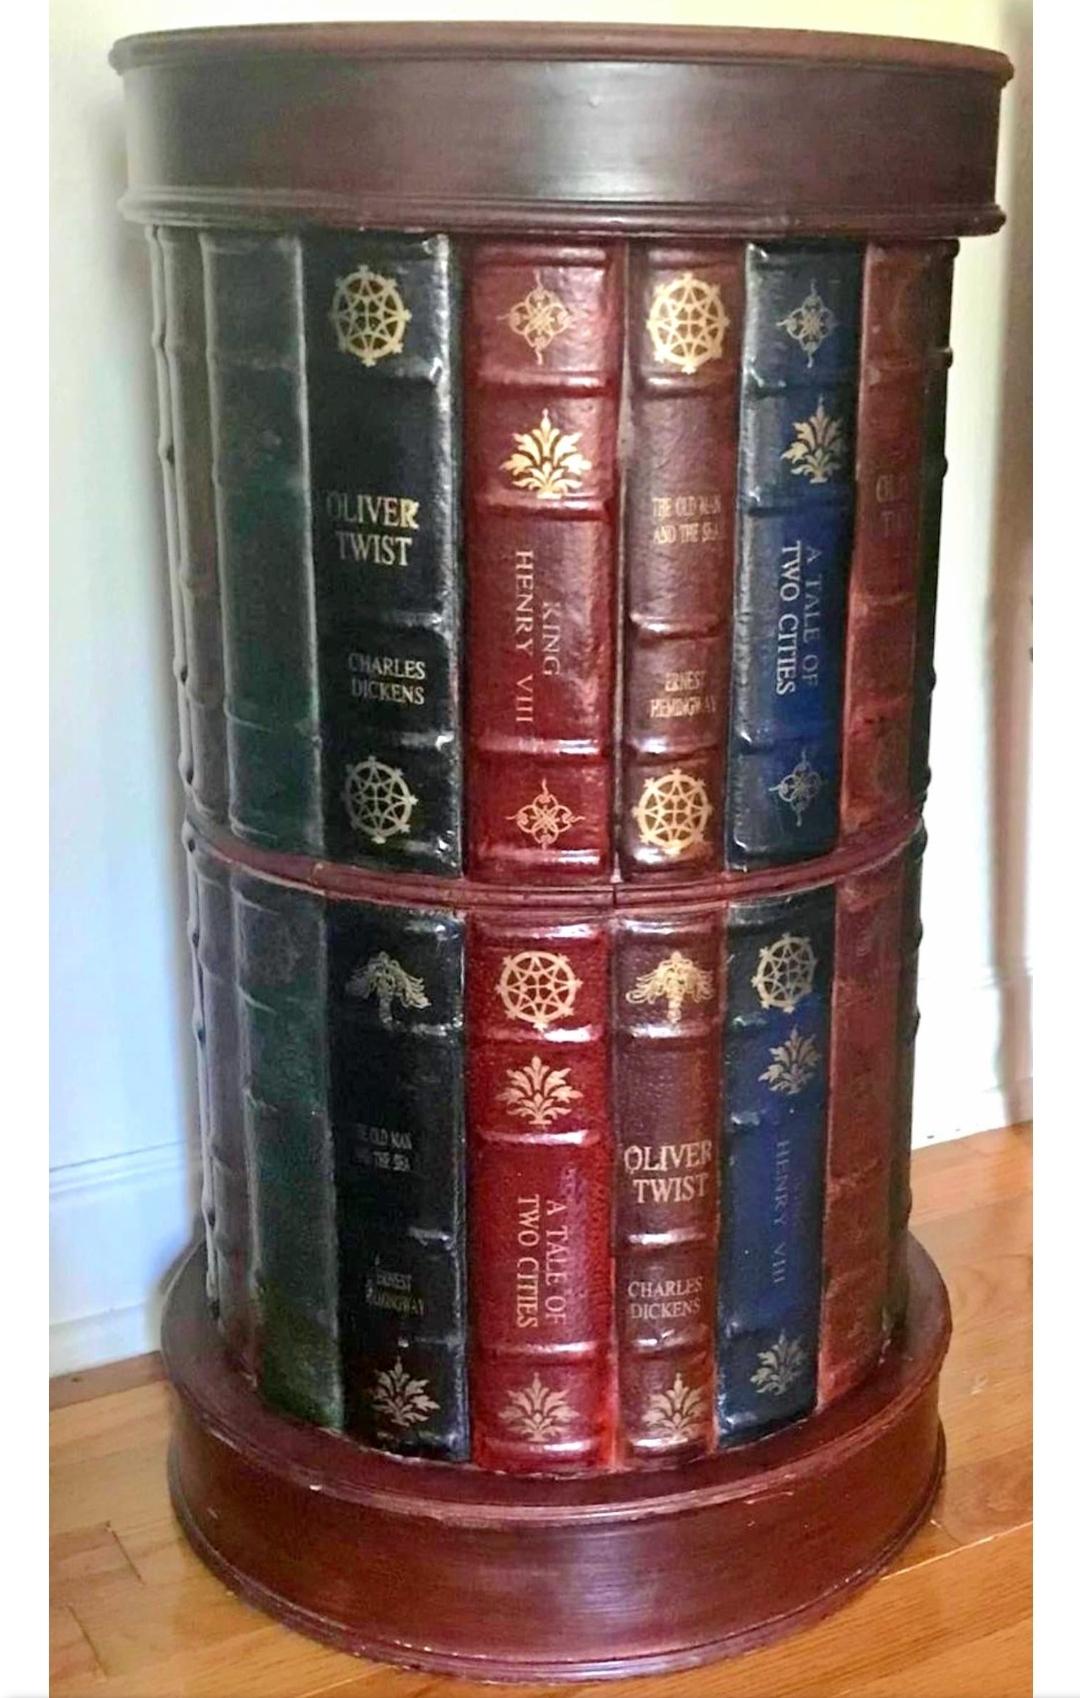 Vintage trompe l'oeil/ stacked book drum table.
In the romantic style of Maitland Smith. 
Hand tooled leather bindings with the English classics written in gold leafing.
Sealed black interior.
Fitted drum lid.
Great for throw pillow or blanket